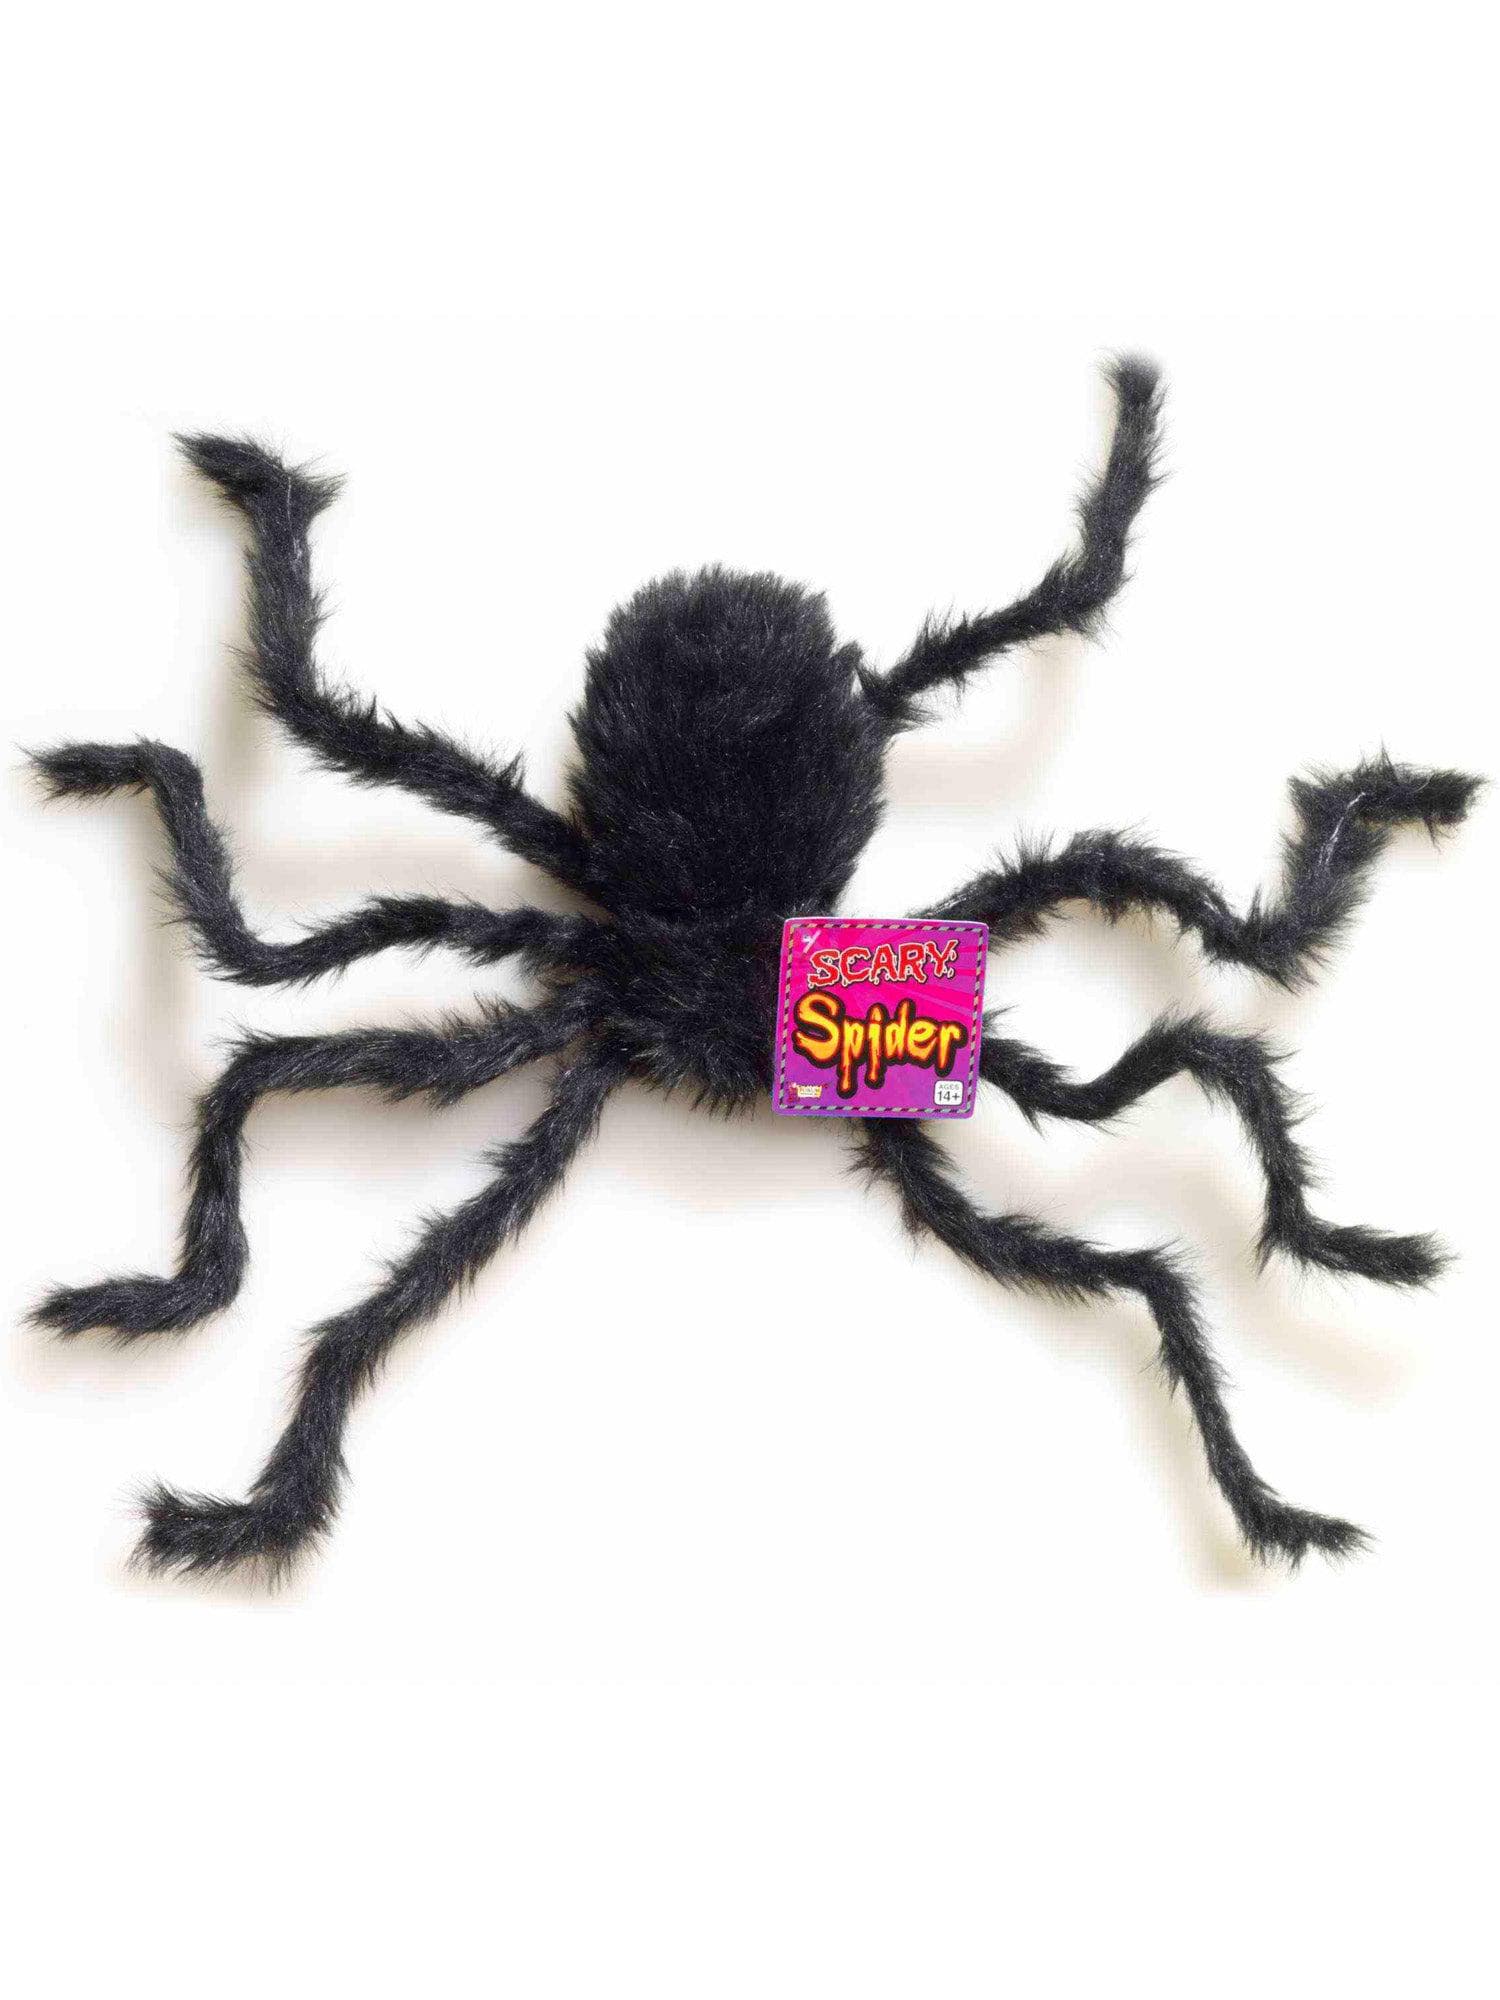 Black Hairy Spider Poseable Prop - costumes.com